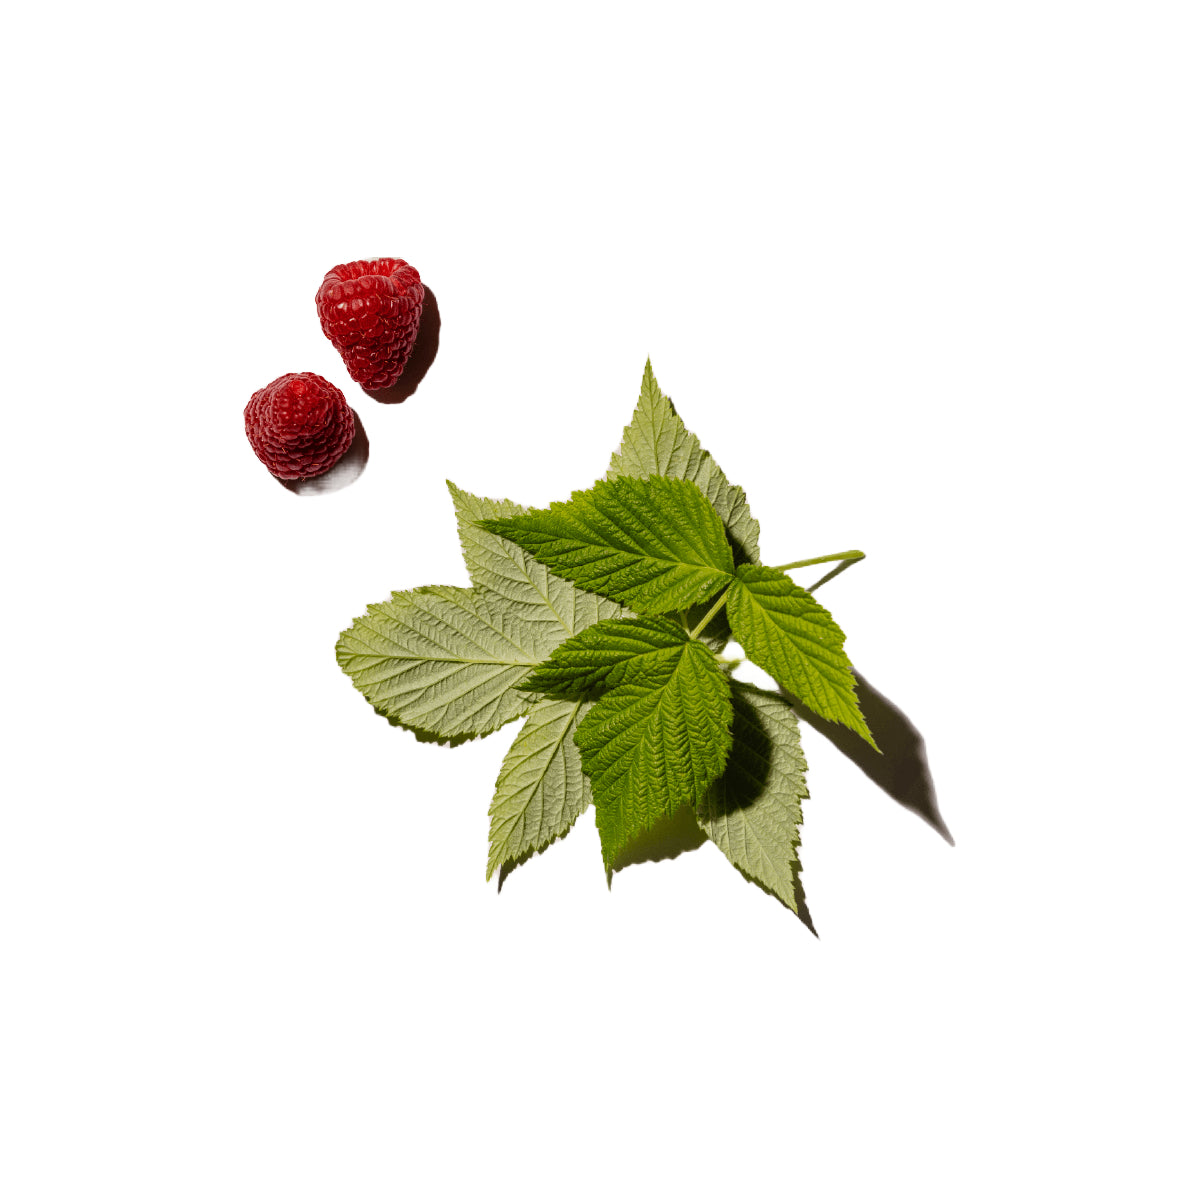 red raspberry leaves and berries on white background